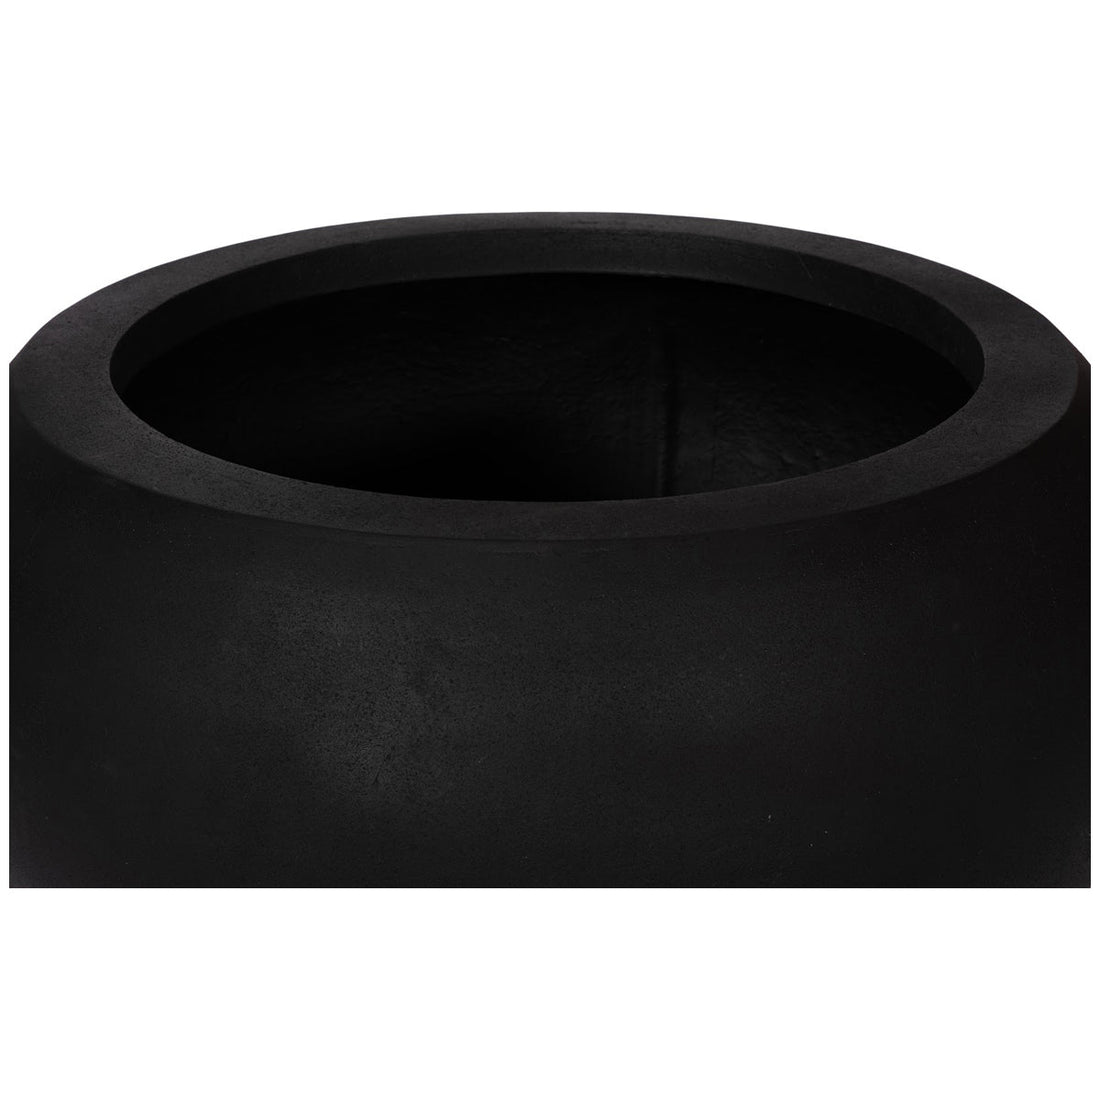 Phillips Collection Rounded Outdoor Planter